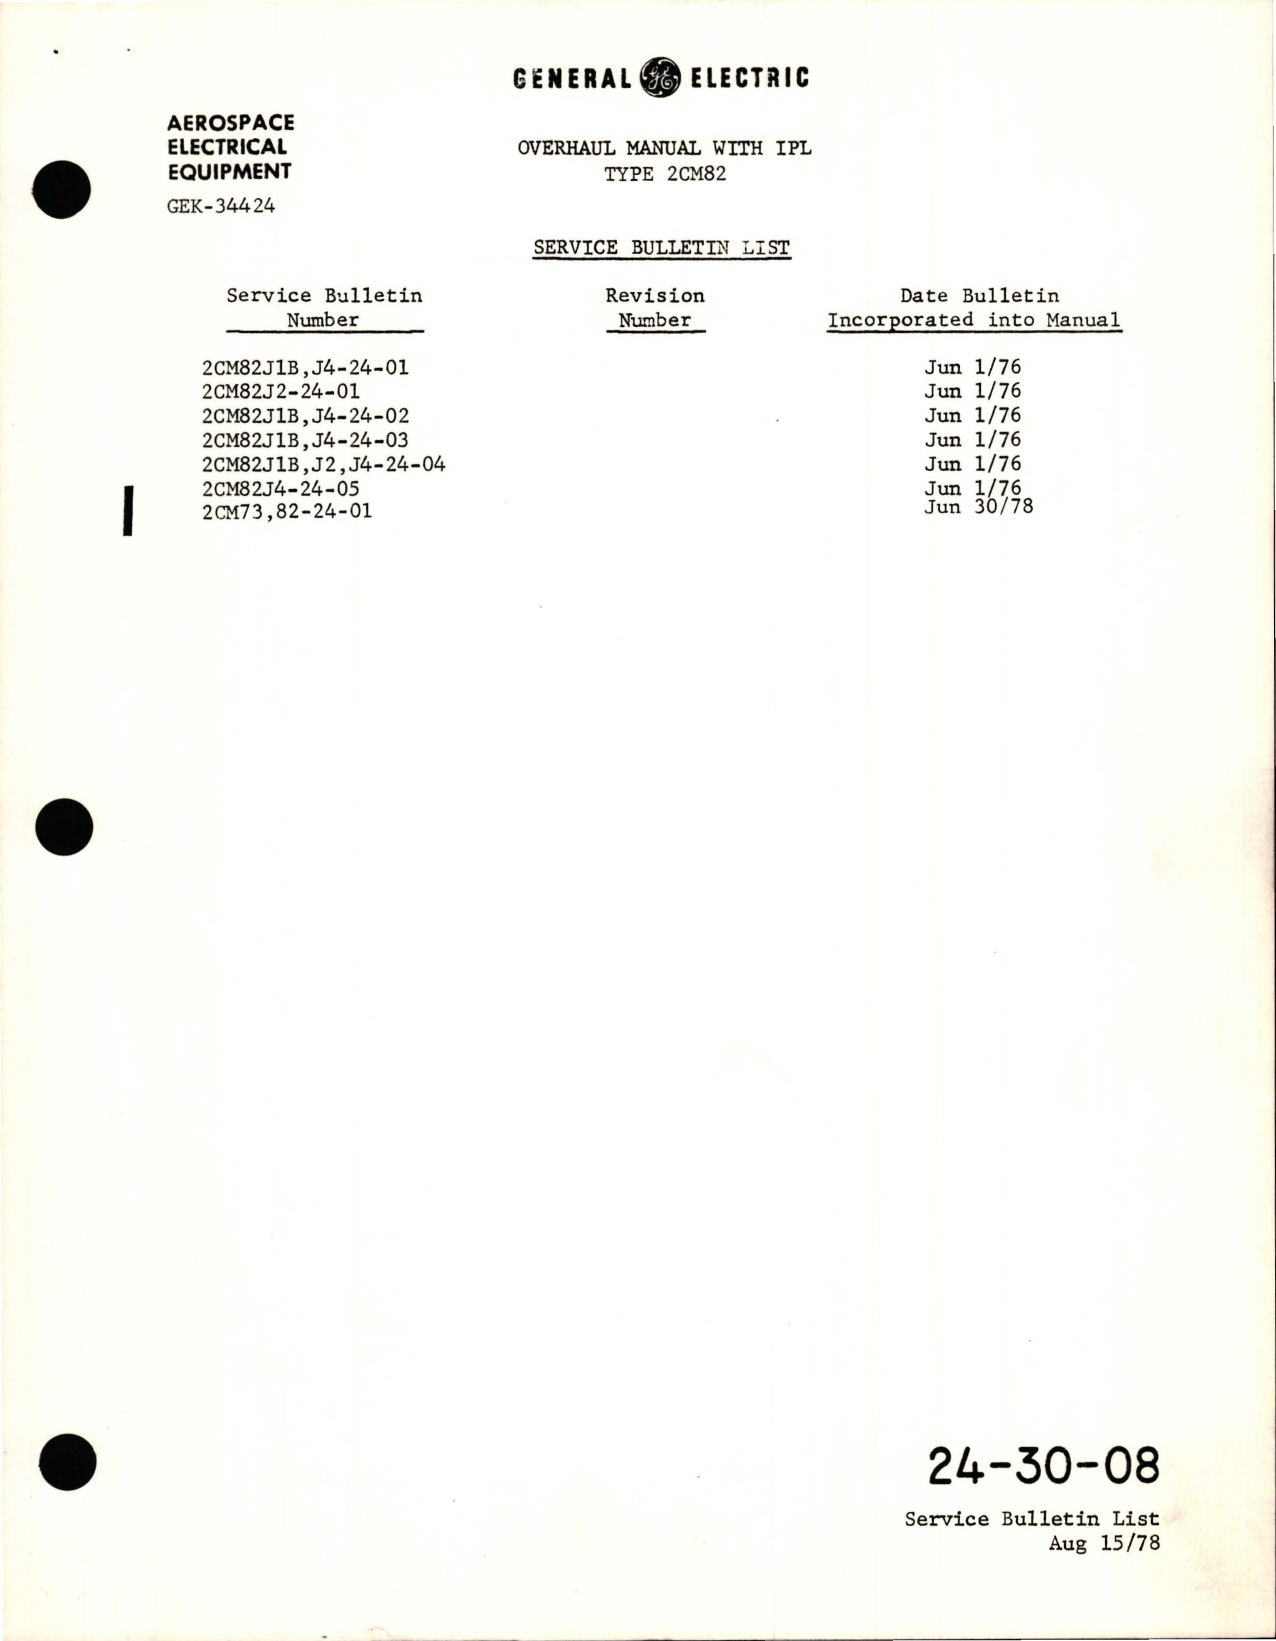 Sample page 7 from AirCorps Library document: Overhaul with Illustrated Parts List for DC Starter Generator - Models 2CM82J1, 2CM82J1B, 2CM82J2, and 2CM82J4 - Revision 3